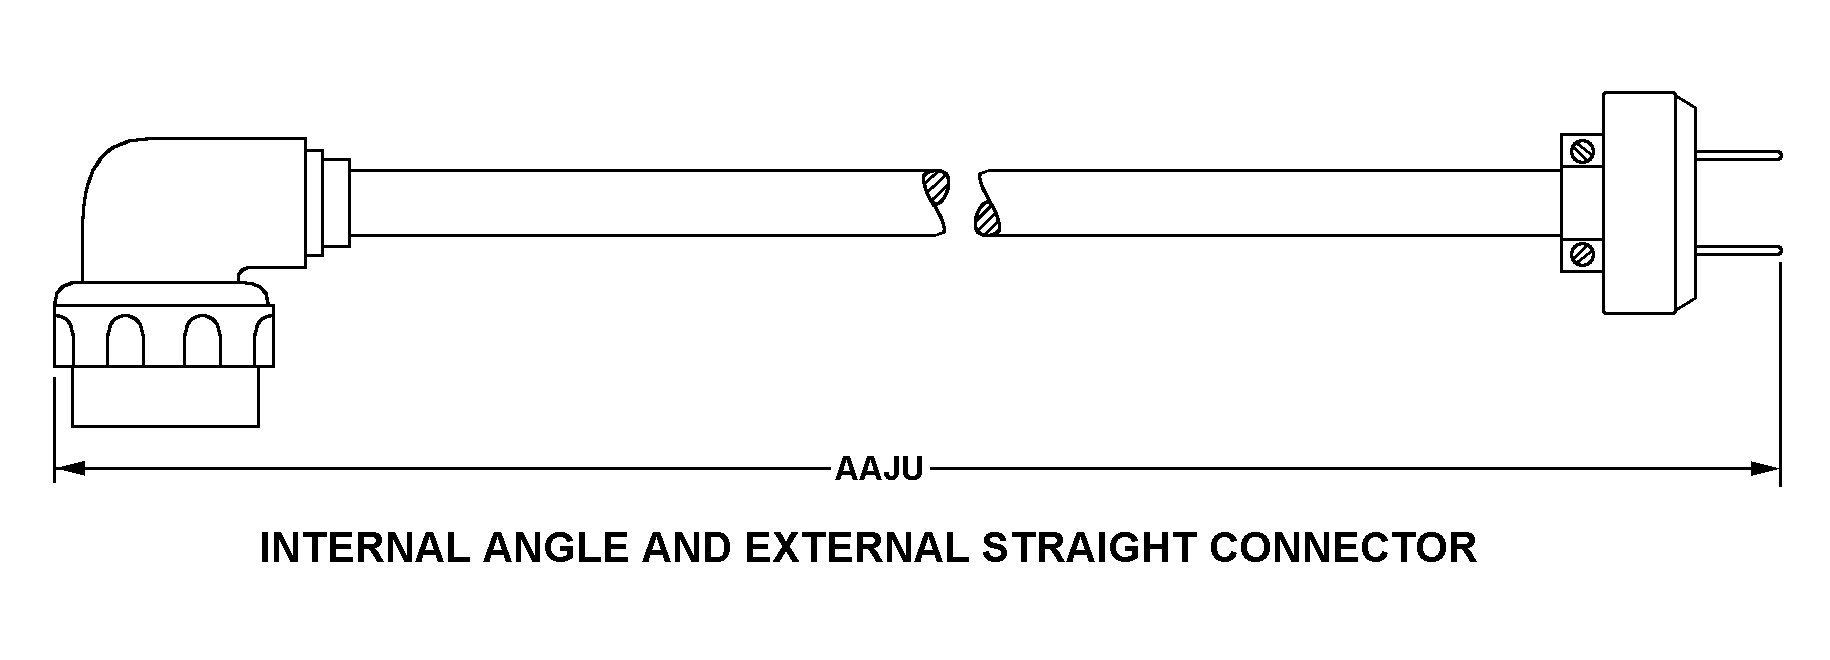 INTERNAL ANGLE AND EXTERNAL STRAIGHT CONNECTOR style nsn 6150-00-357-2904